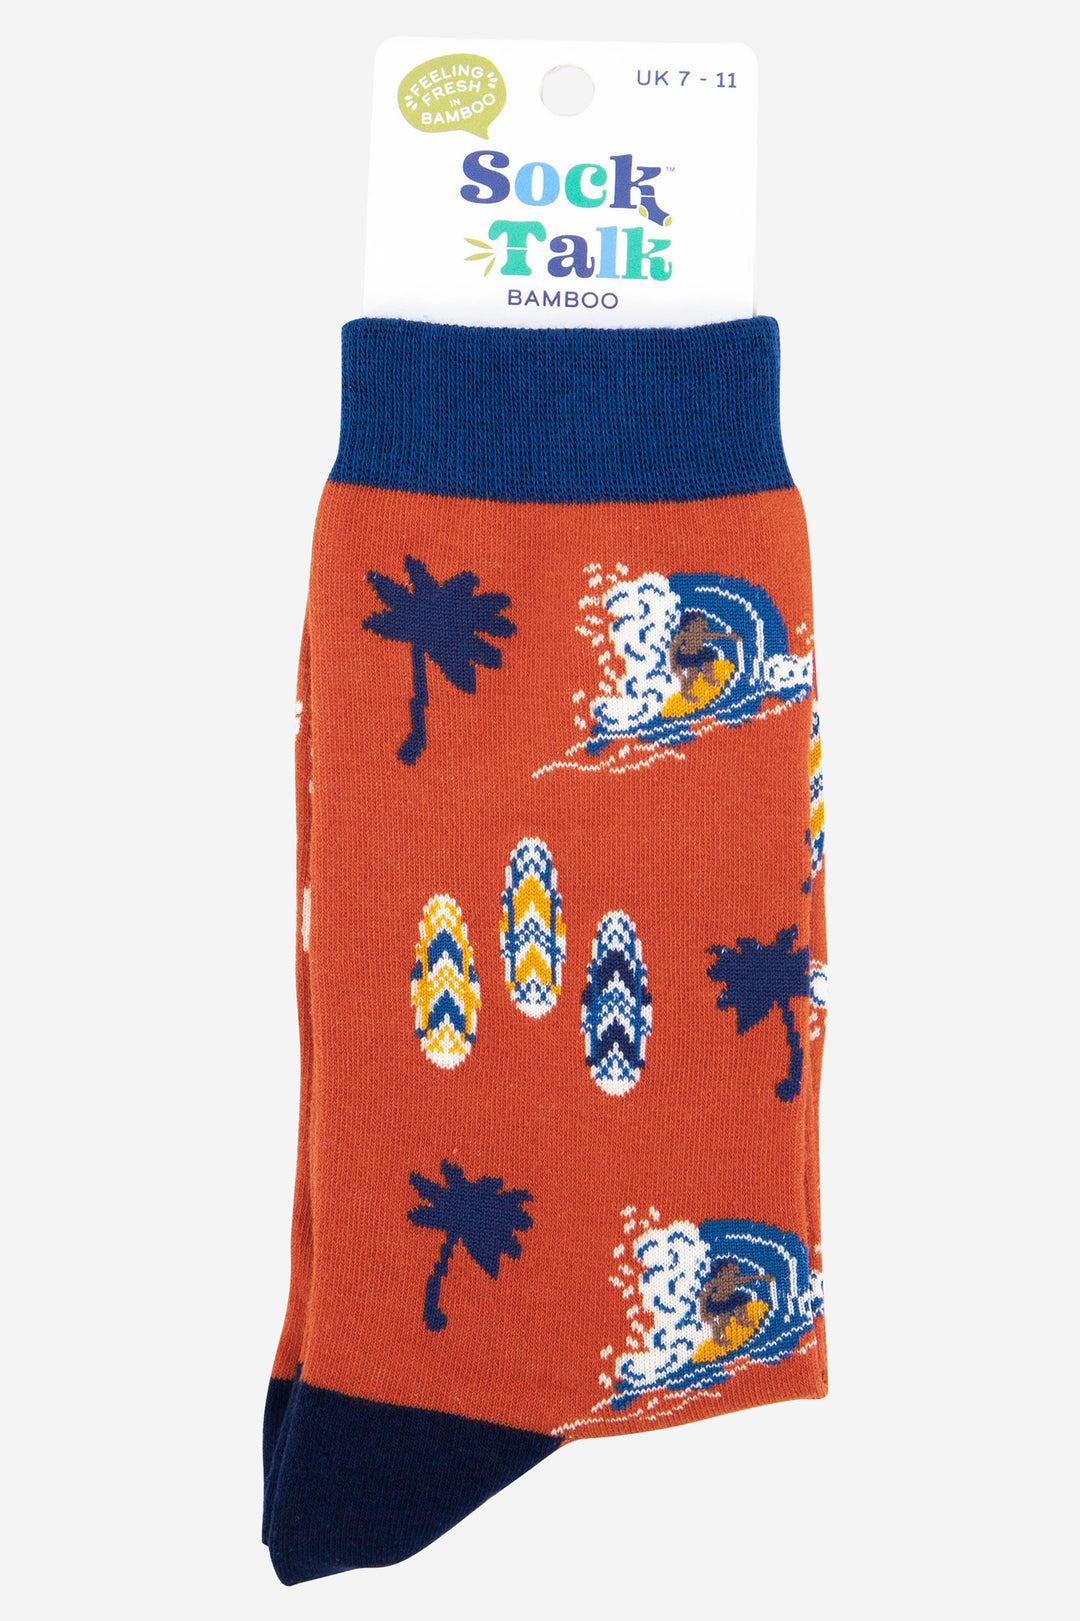 mens bamboo surfing dress socks in orange and blue uk size 7-11